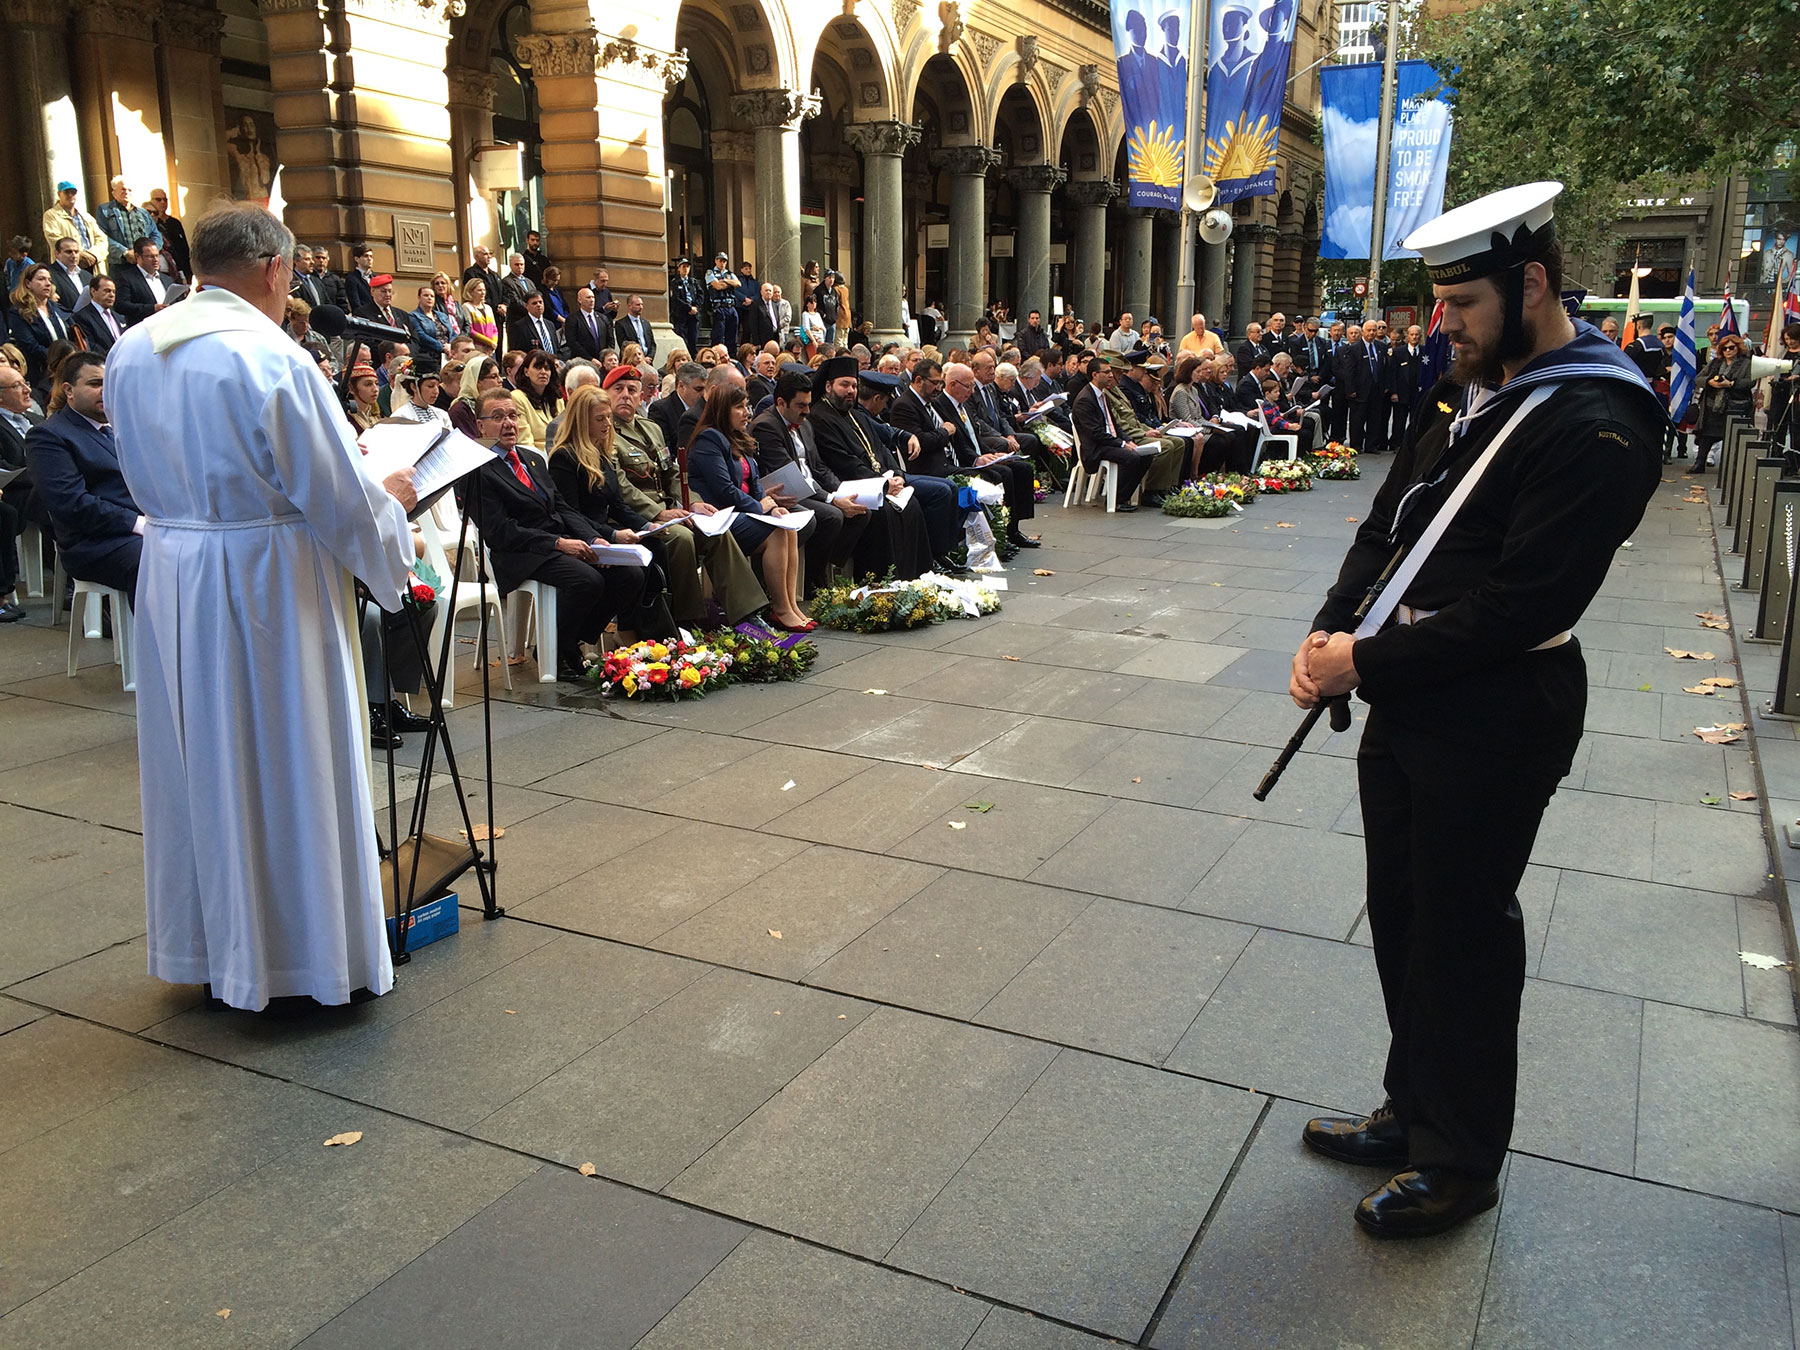 Martin Place Cenotaph Wreath Laying Ceremony. May 2015